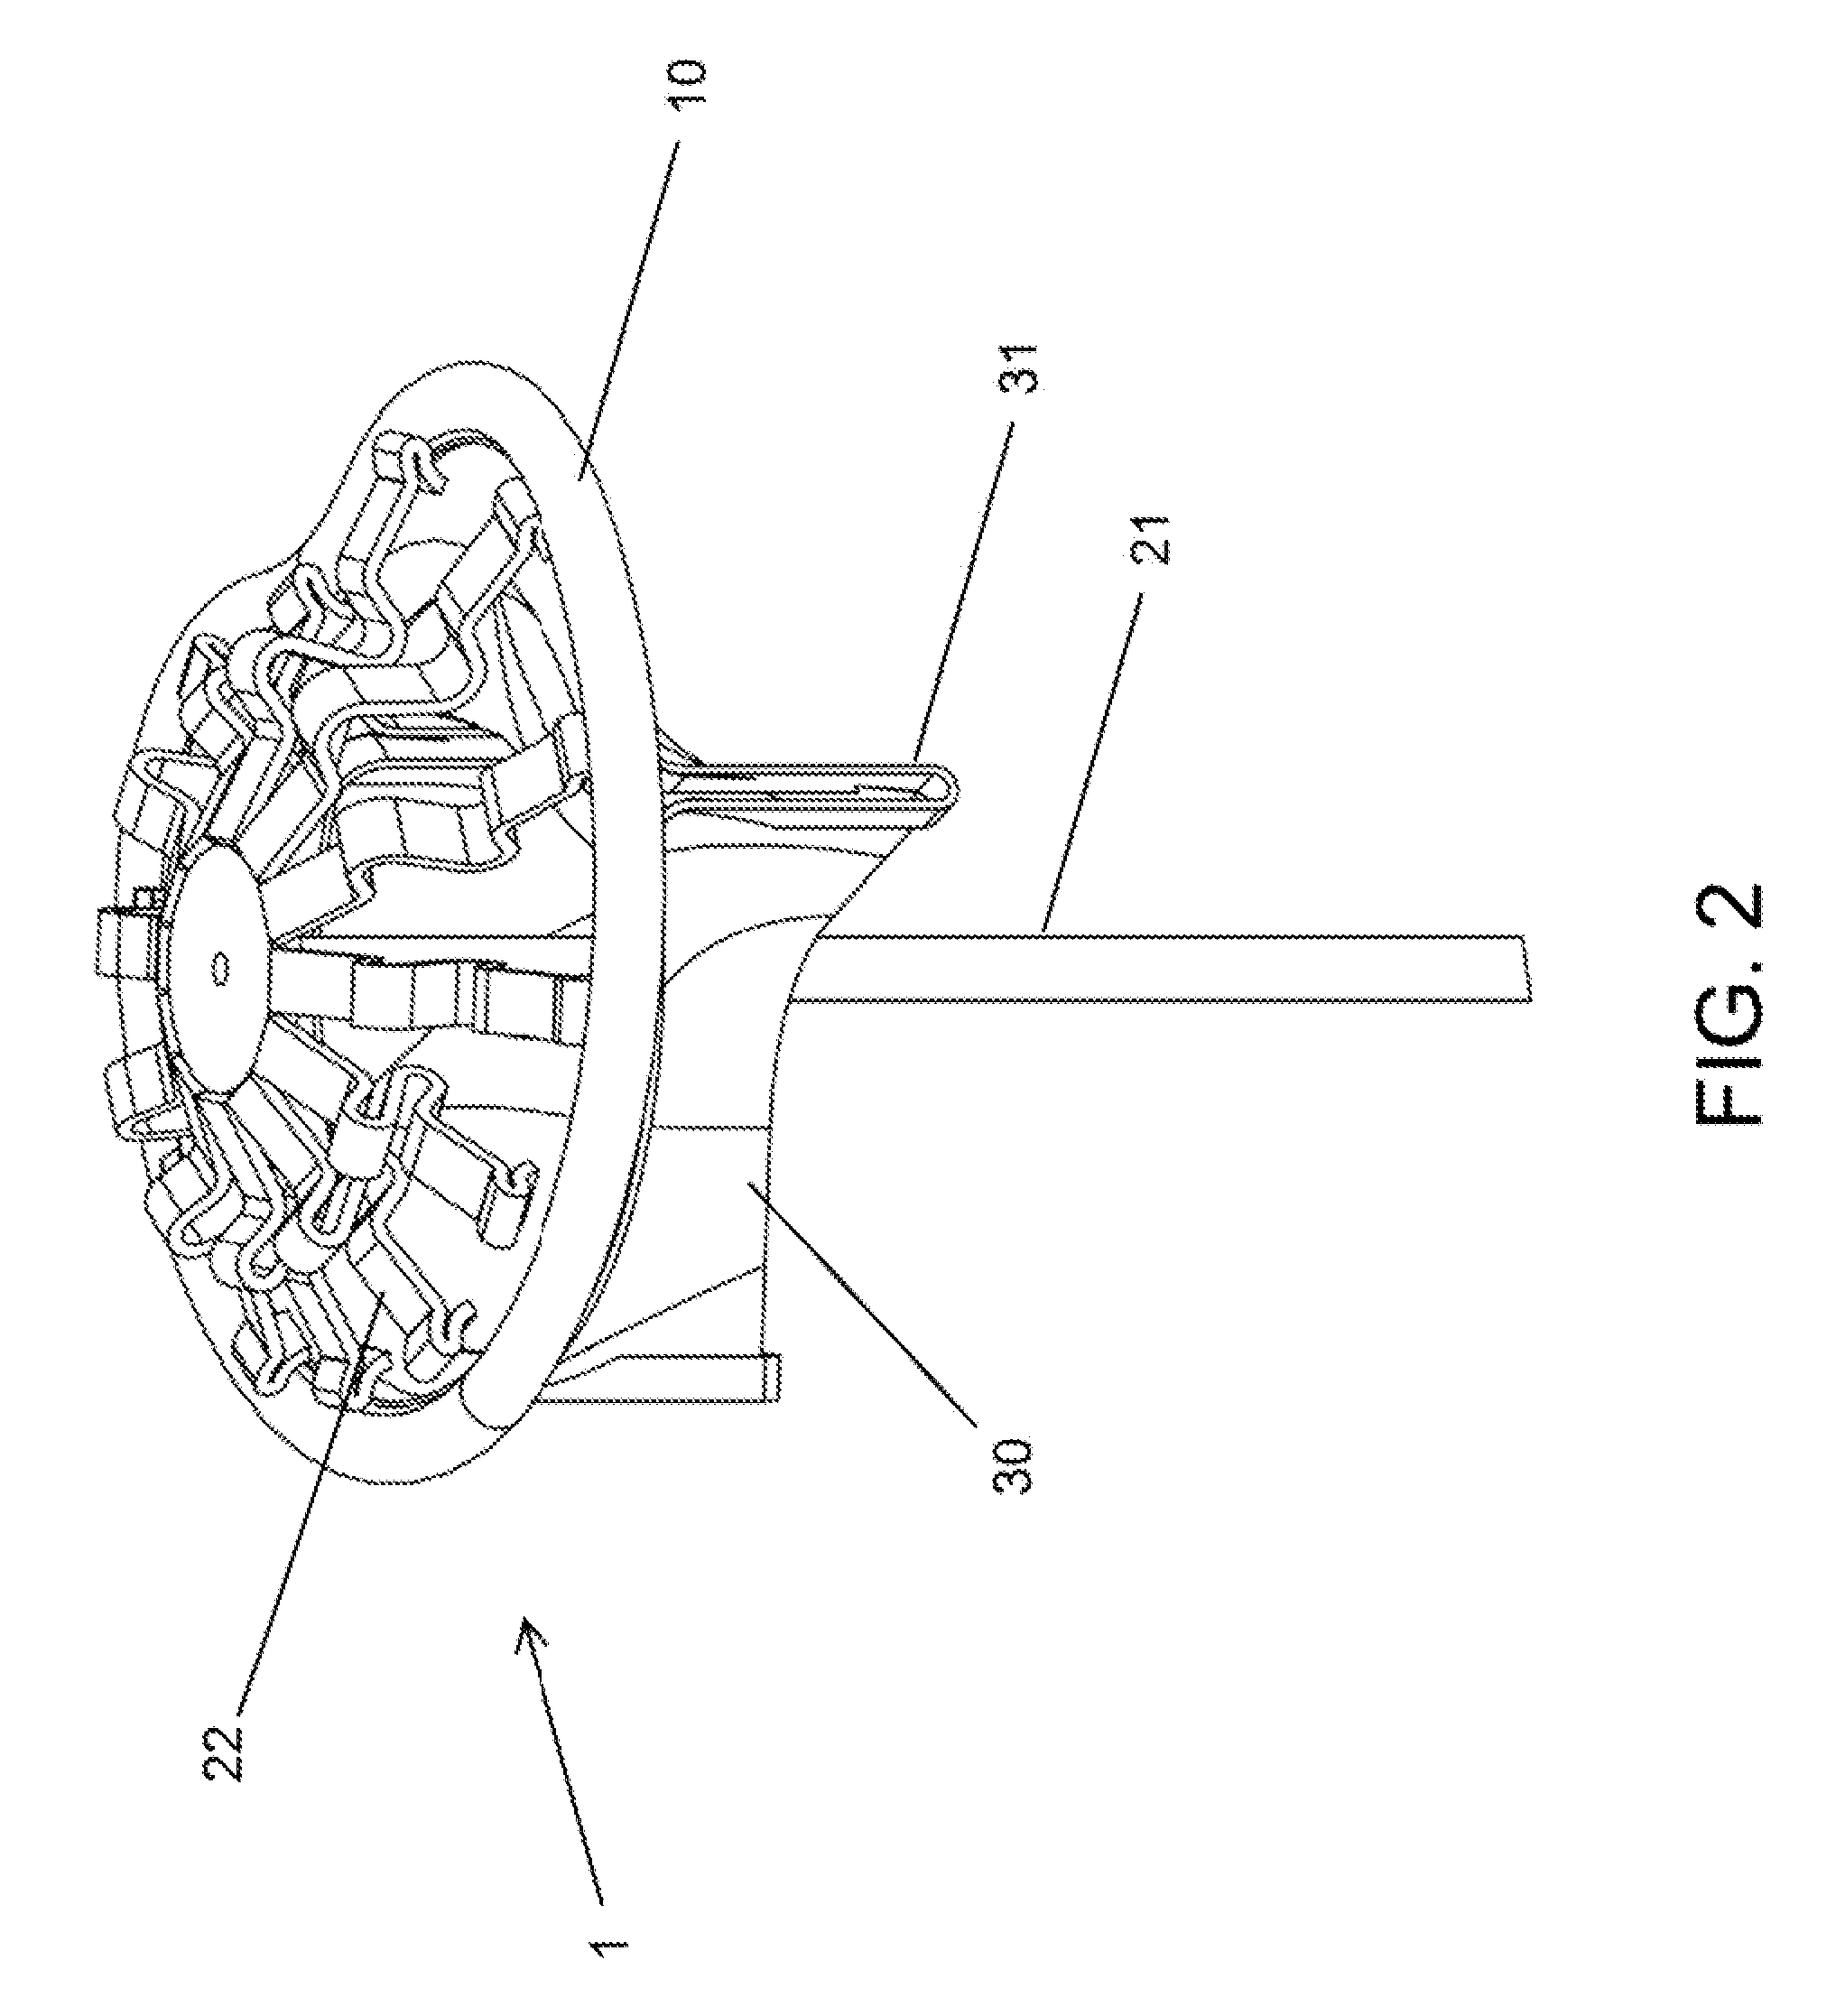 System and Method for Heart Valve Anchoring